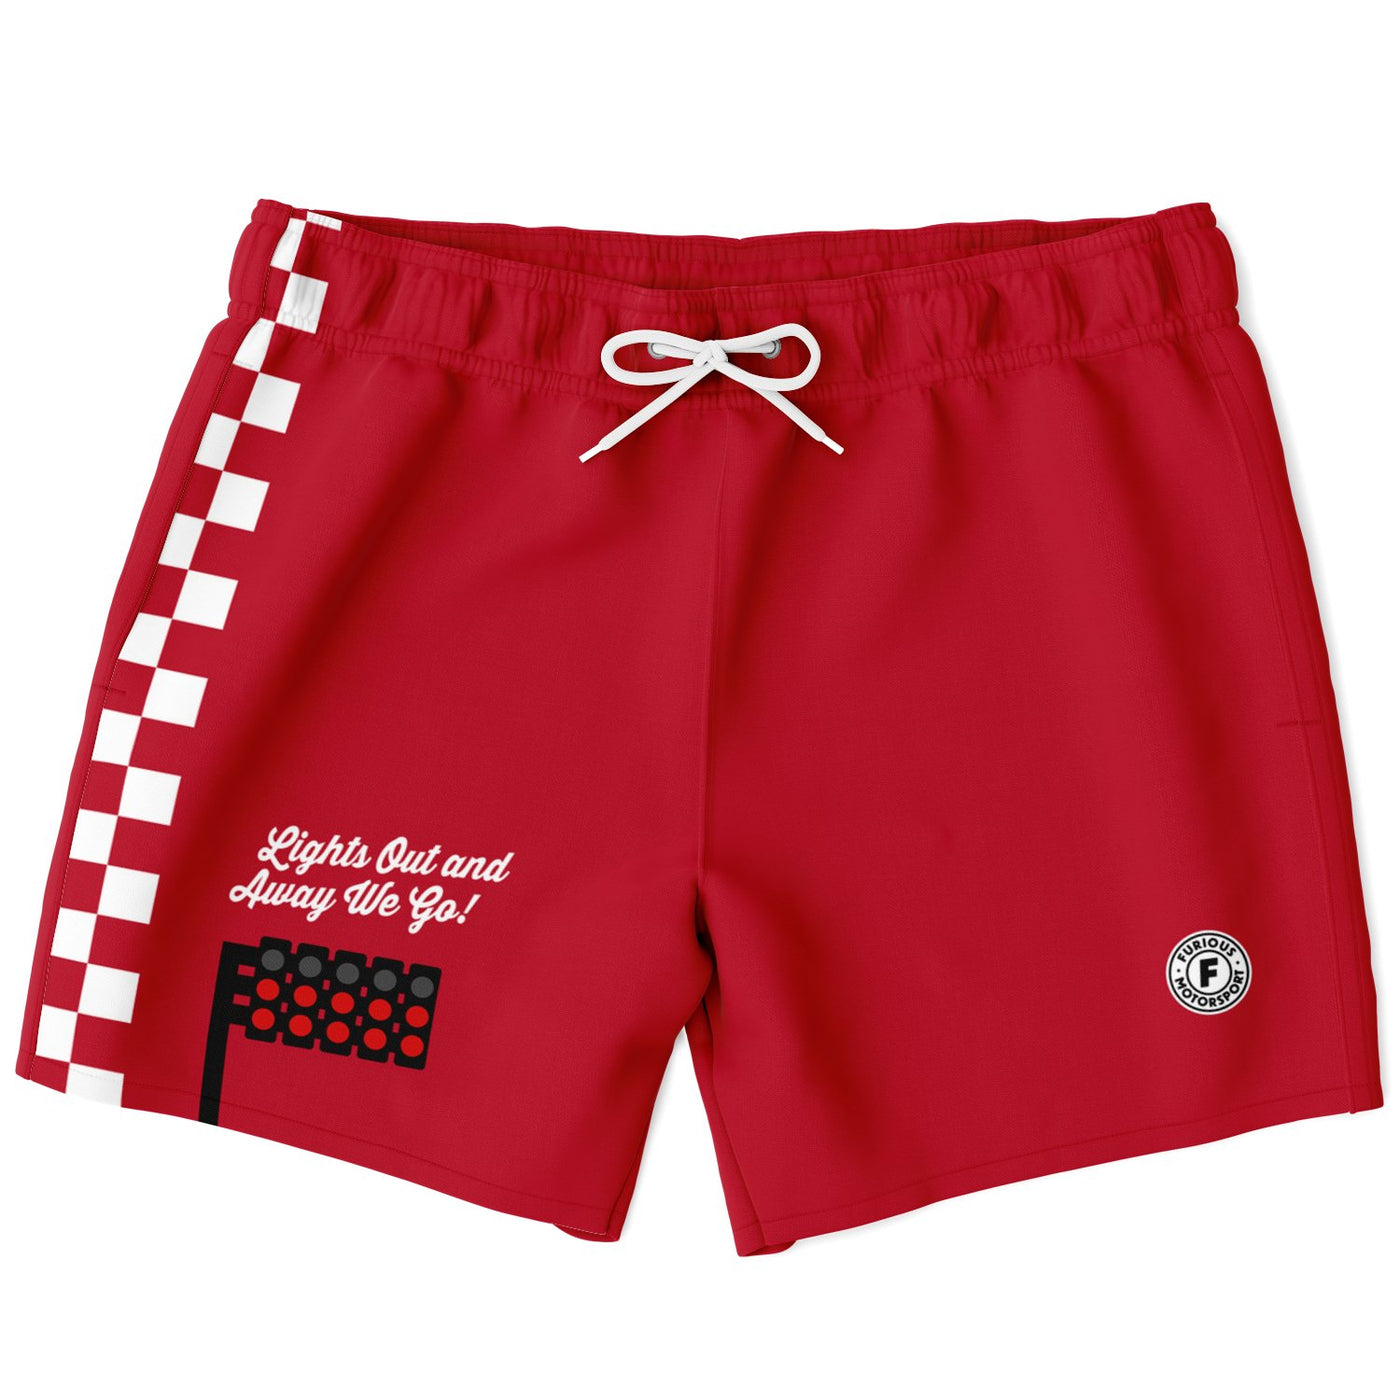 Lights Out Swim Trunks - Crimson Red (Clearance) - Furious Motorsport